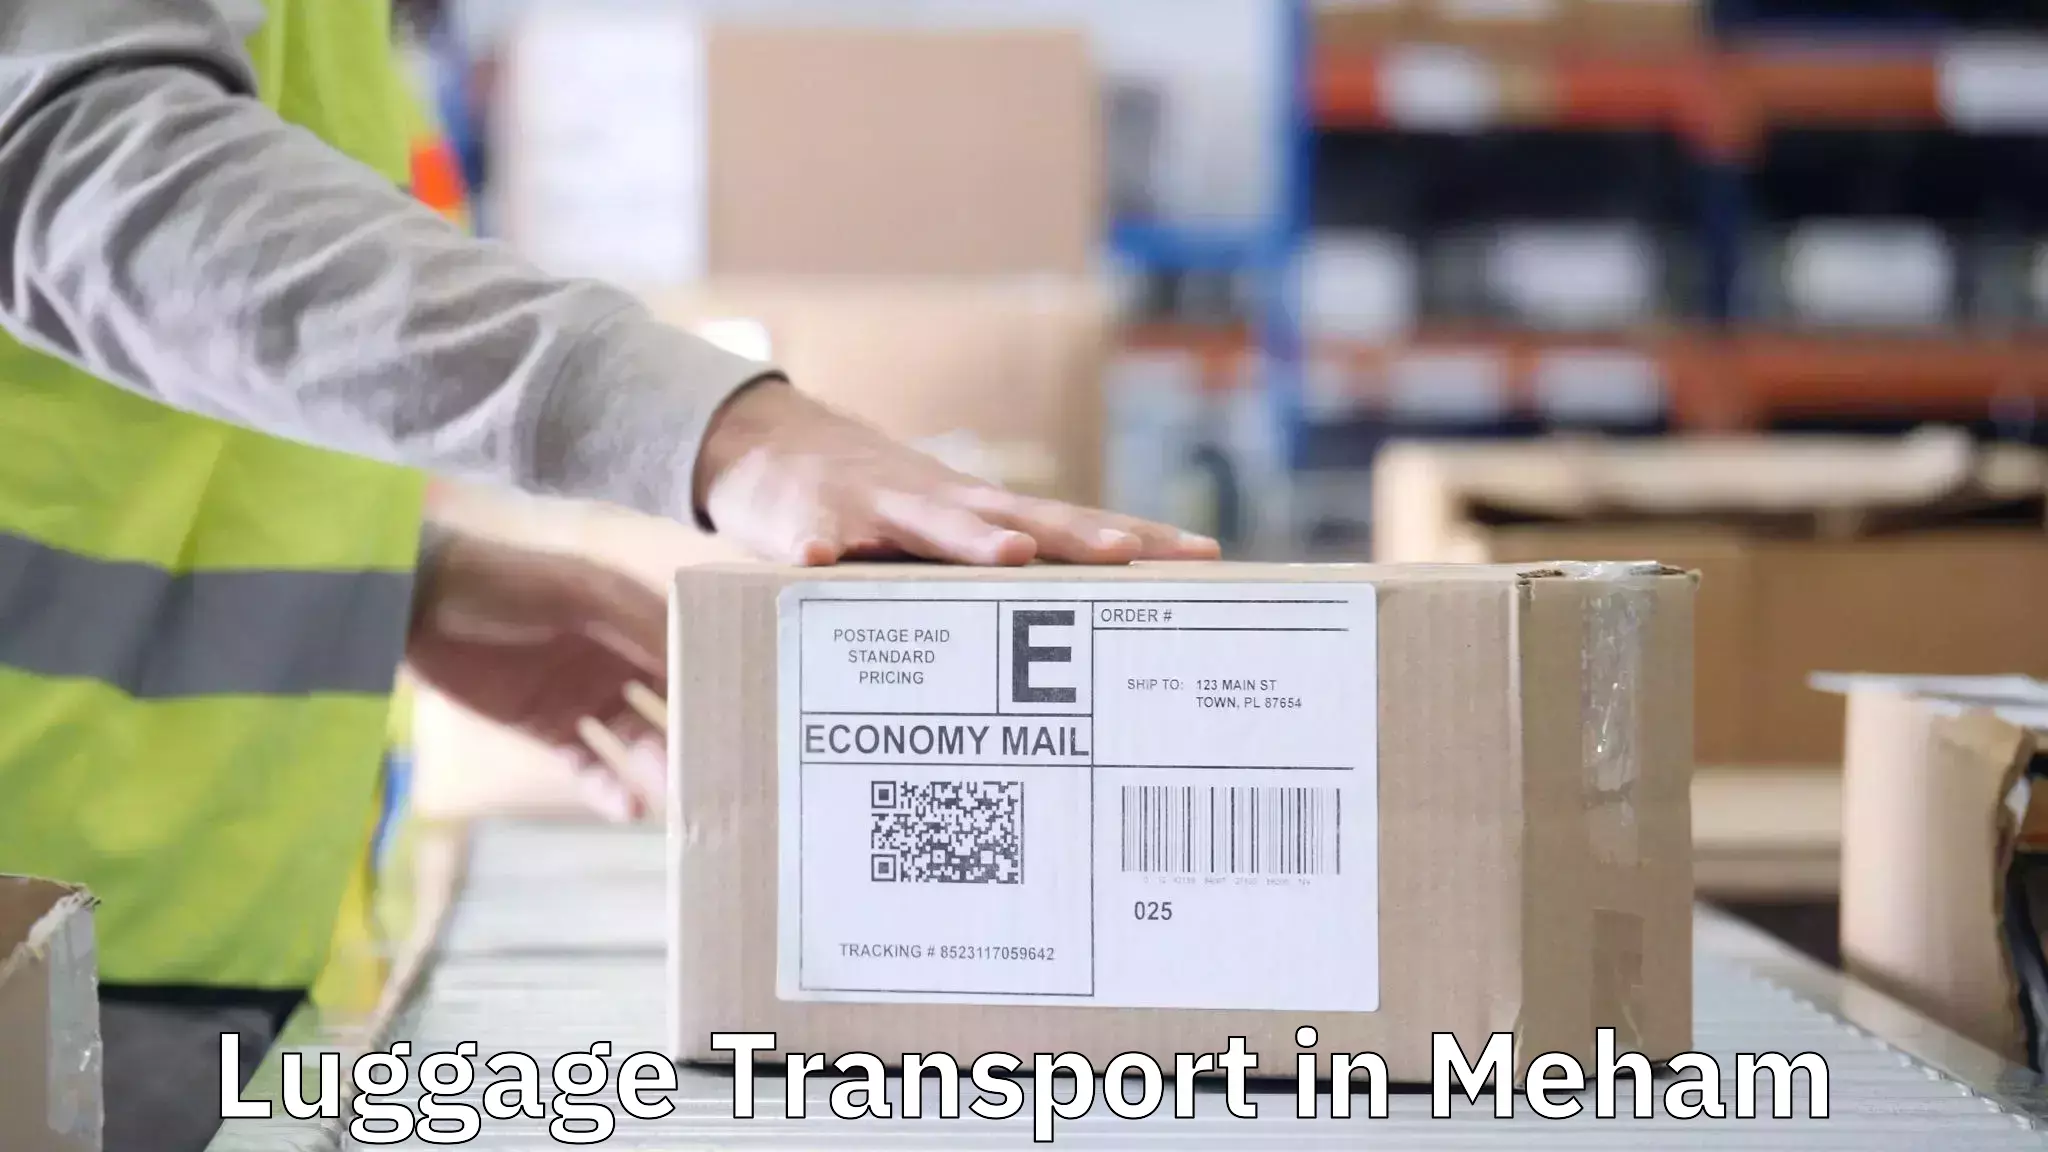 Luggage shipping efficiency in Meham